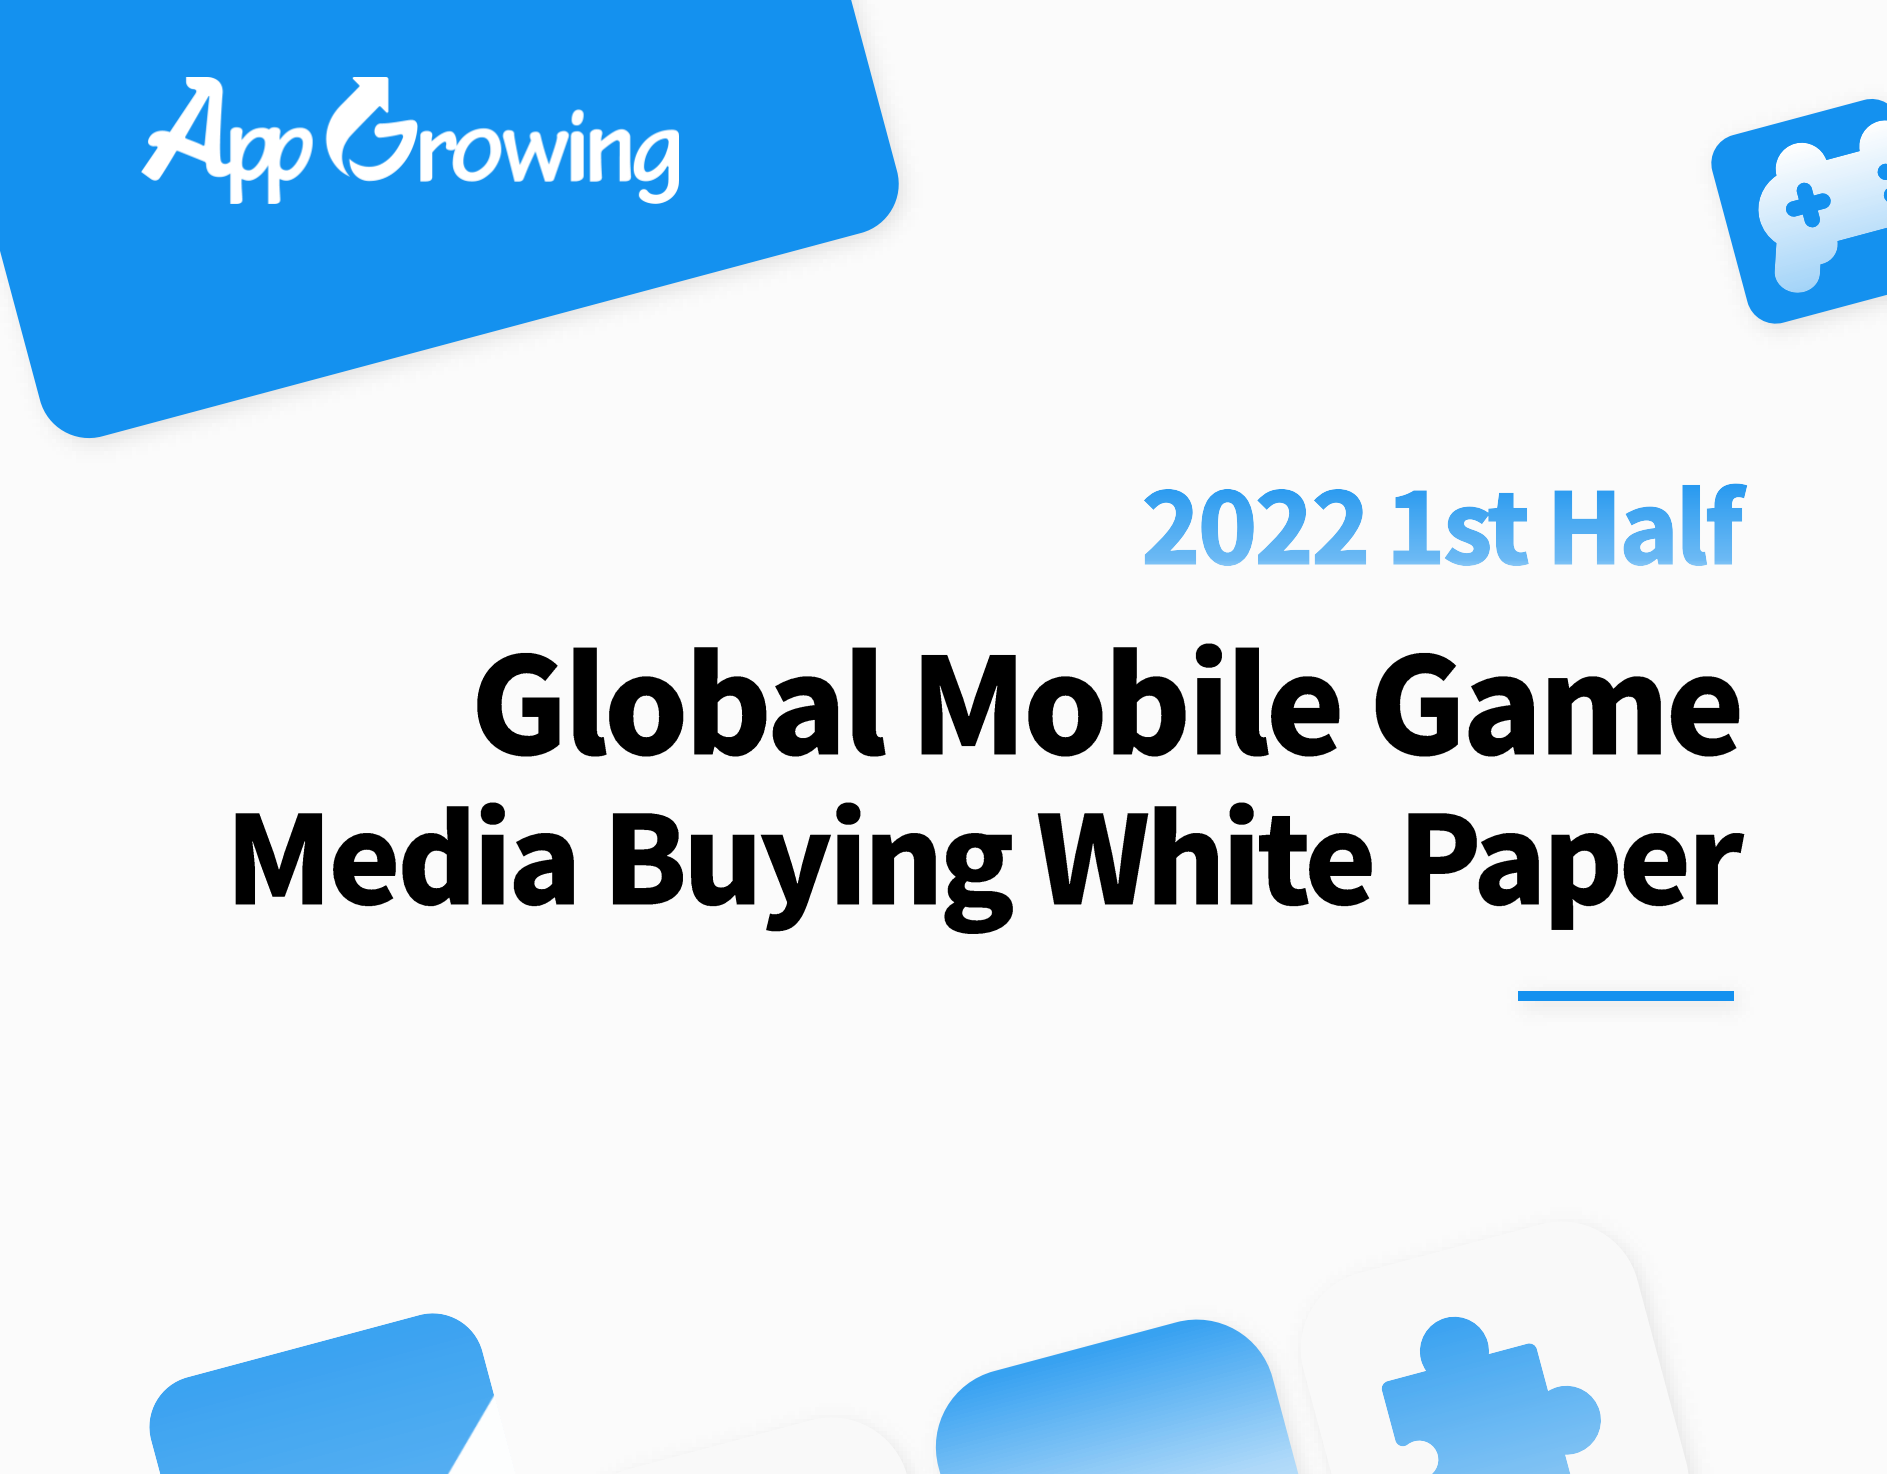 2022 Mobile Game Advertising White Paper - AppGrowing Global